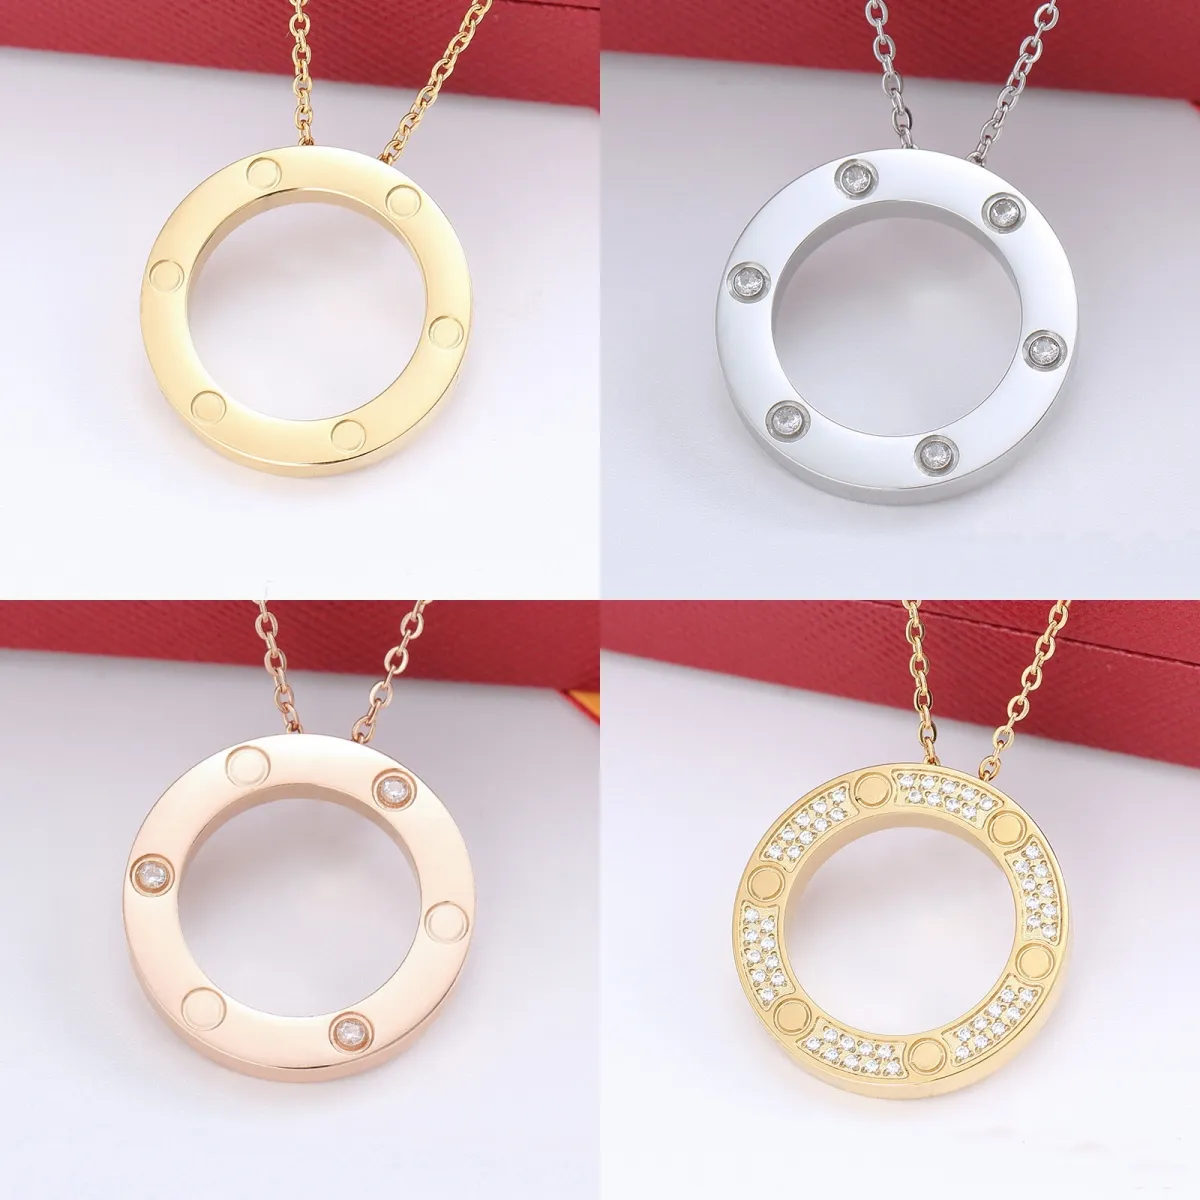 Designer Luxury Circle Love Necklace for Women Love Jewelry Diamond Chain Valentine's Day Gift Necklaces Choker Chain Jewelry Accessories Non Fading